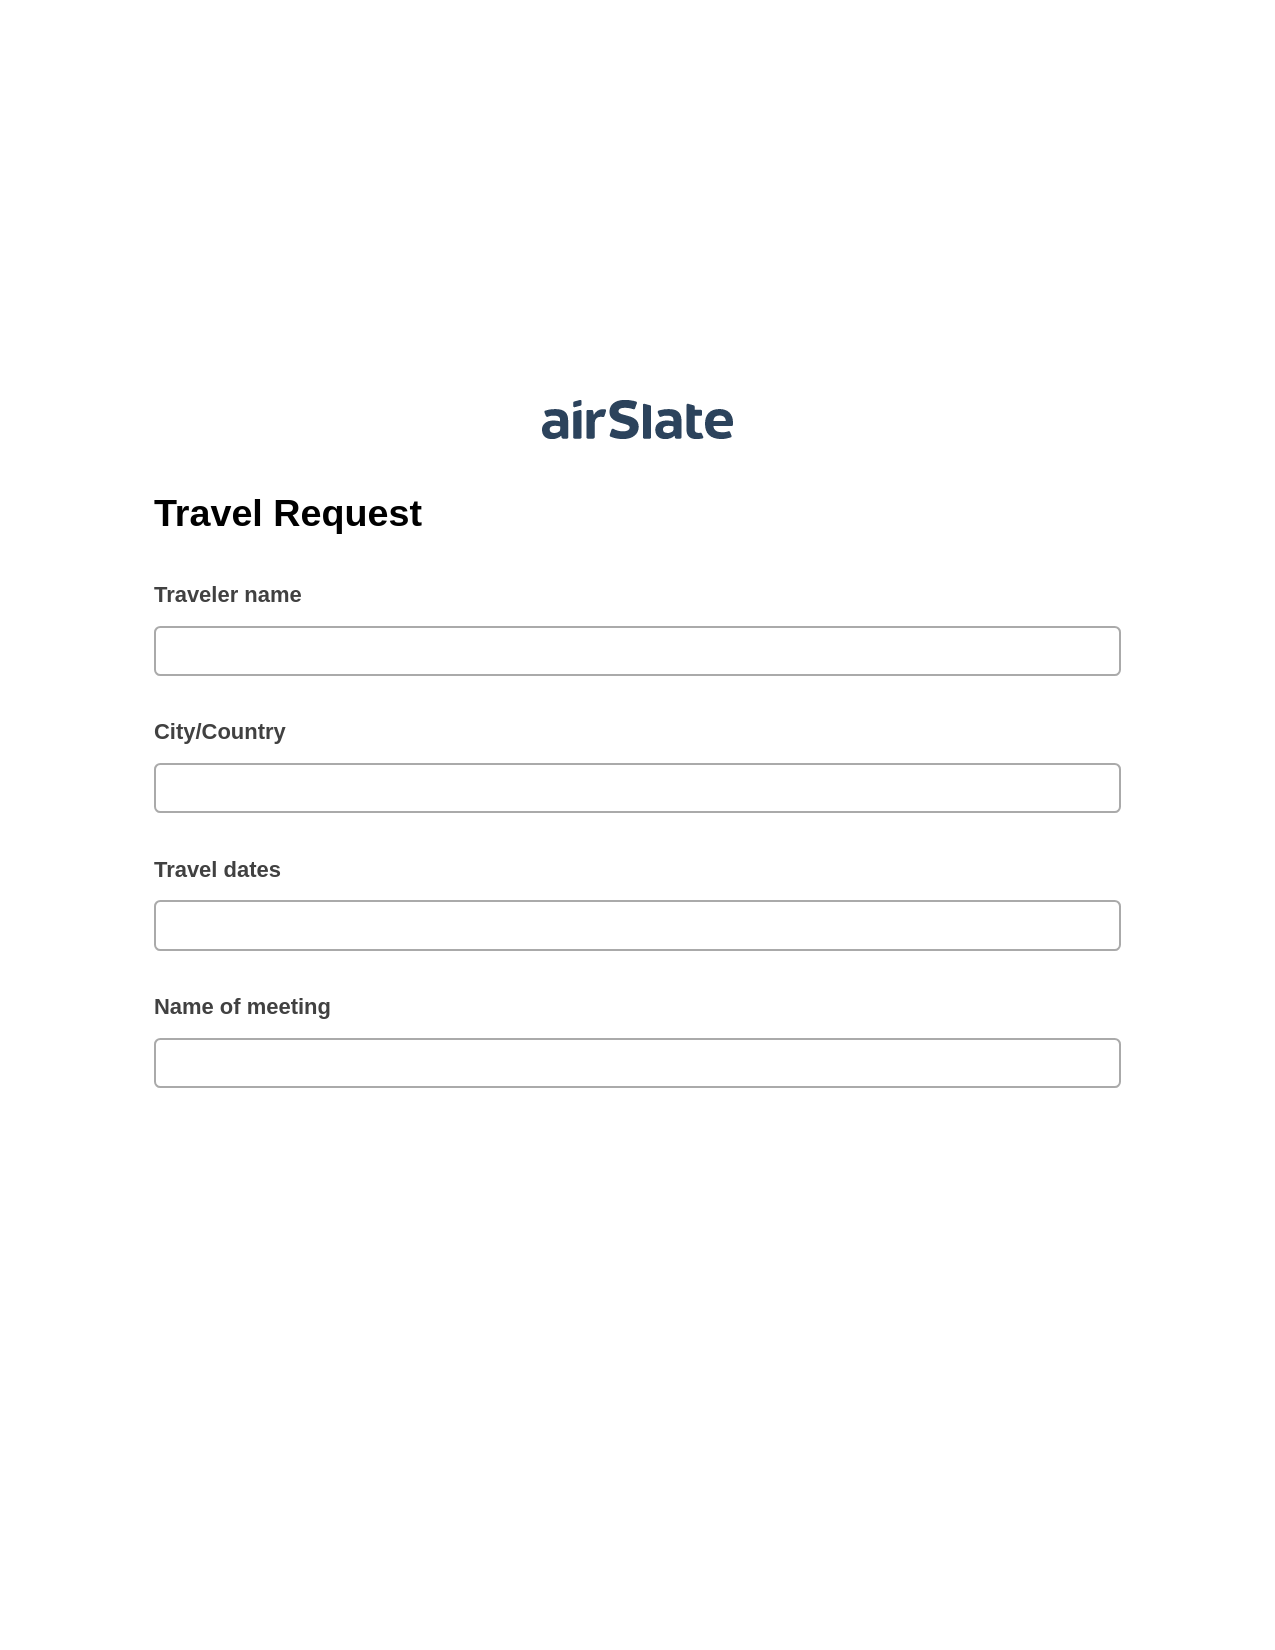 Travel Request Pre-fill from Salesforce Record Bot, System Bot - Create a Slate in another Flow, Export to Smartsheet